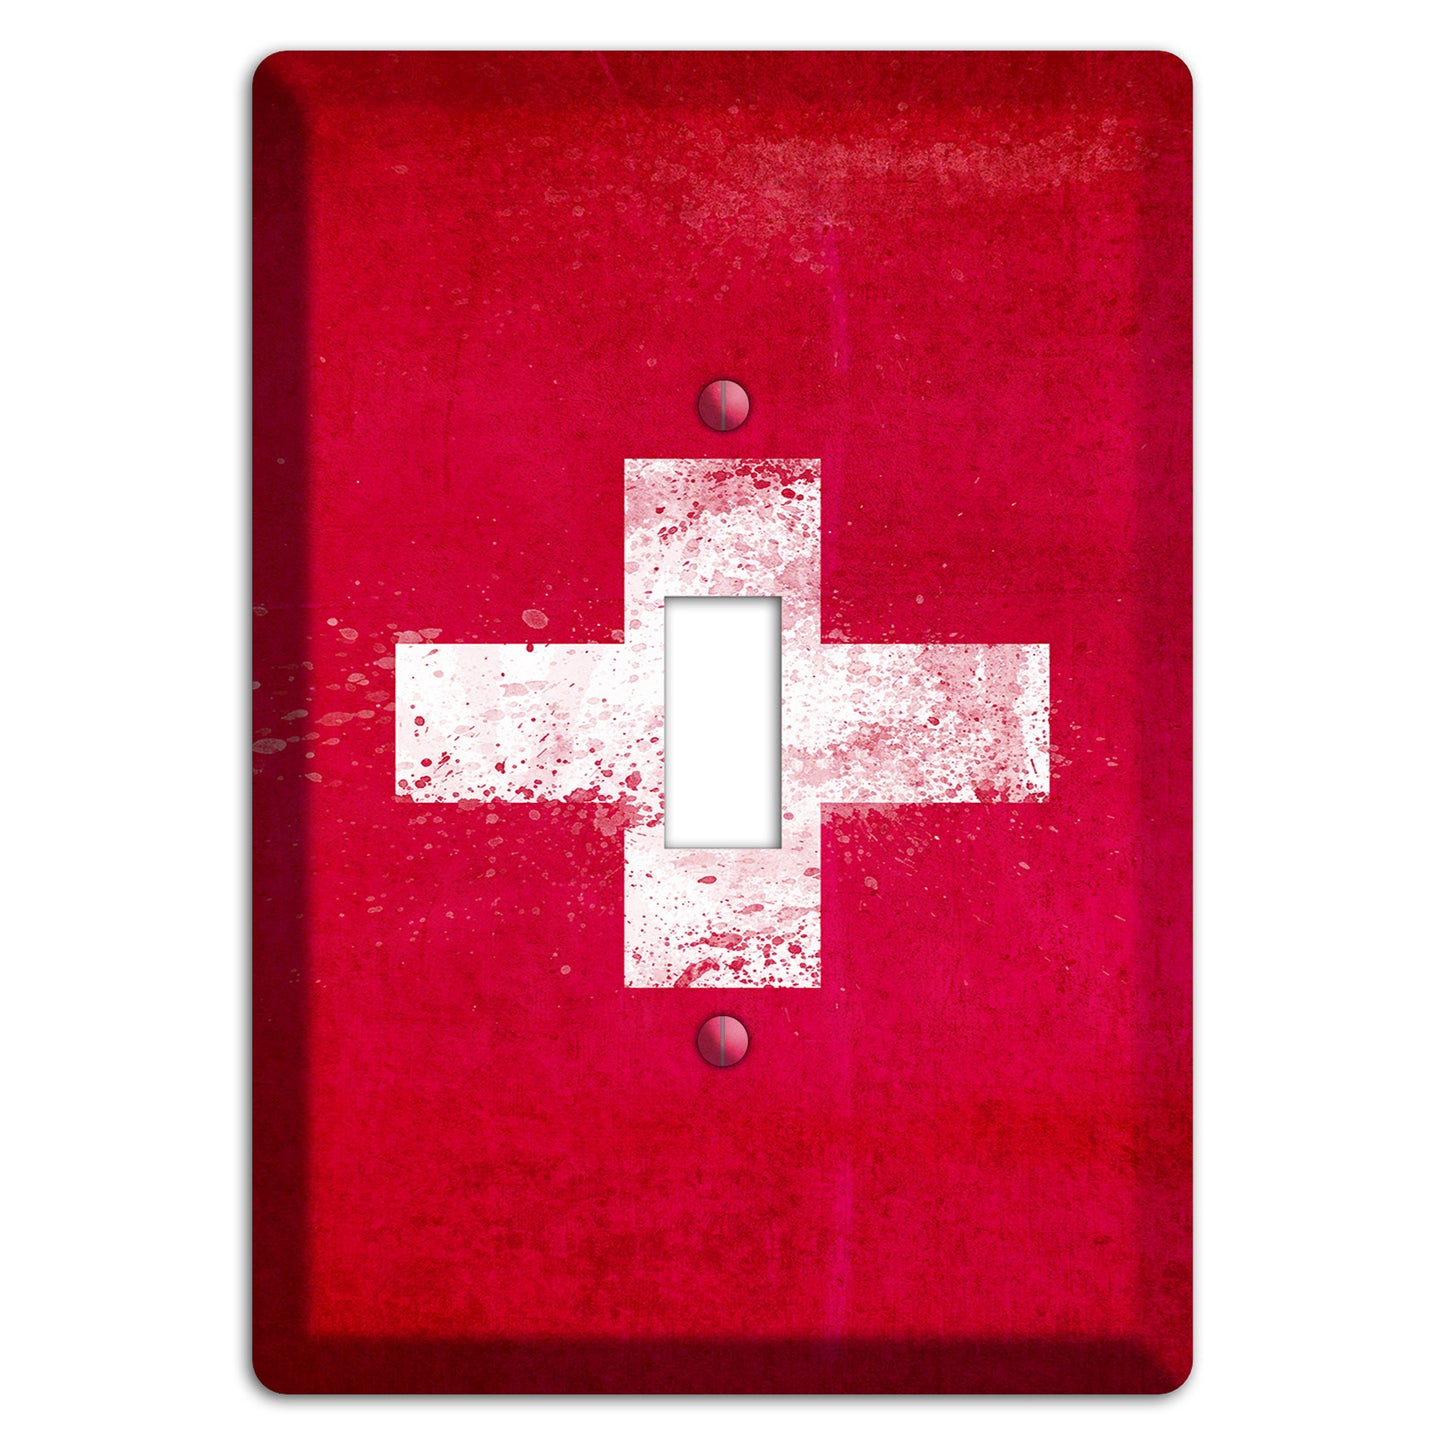 Switzerland Cover Plates Cover Plates